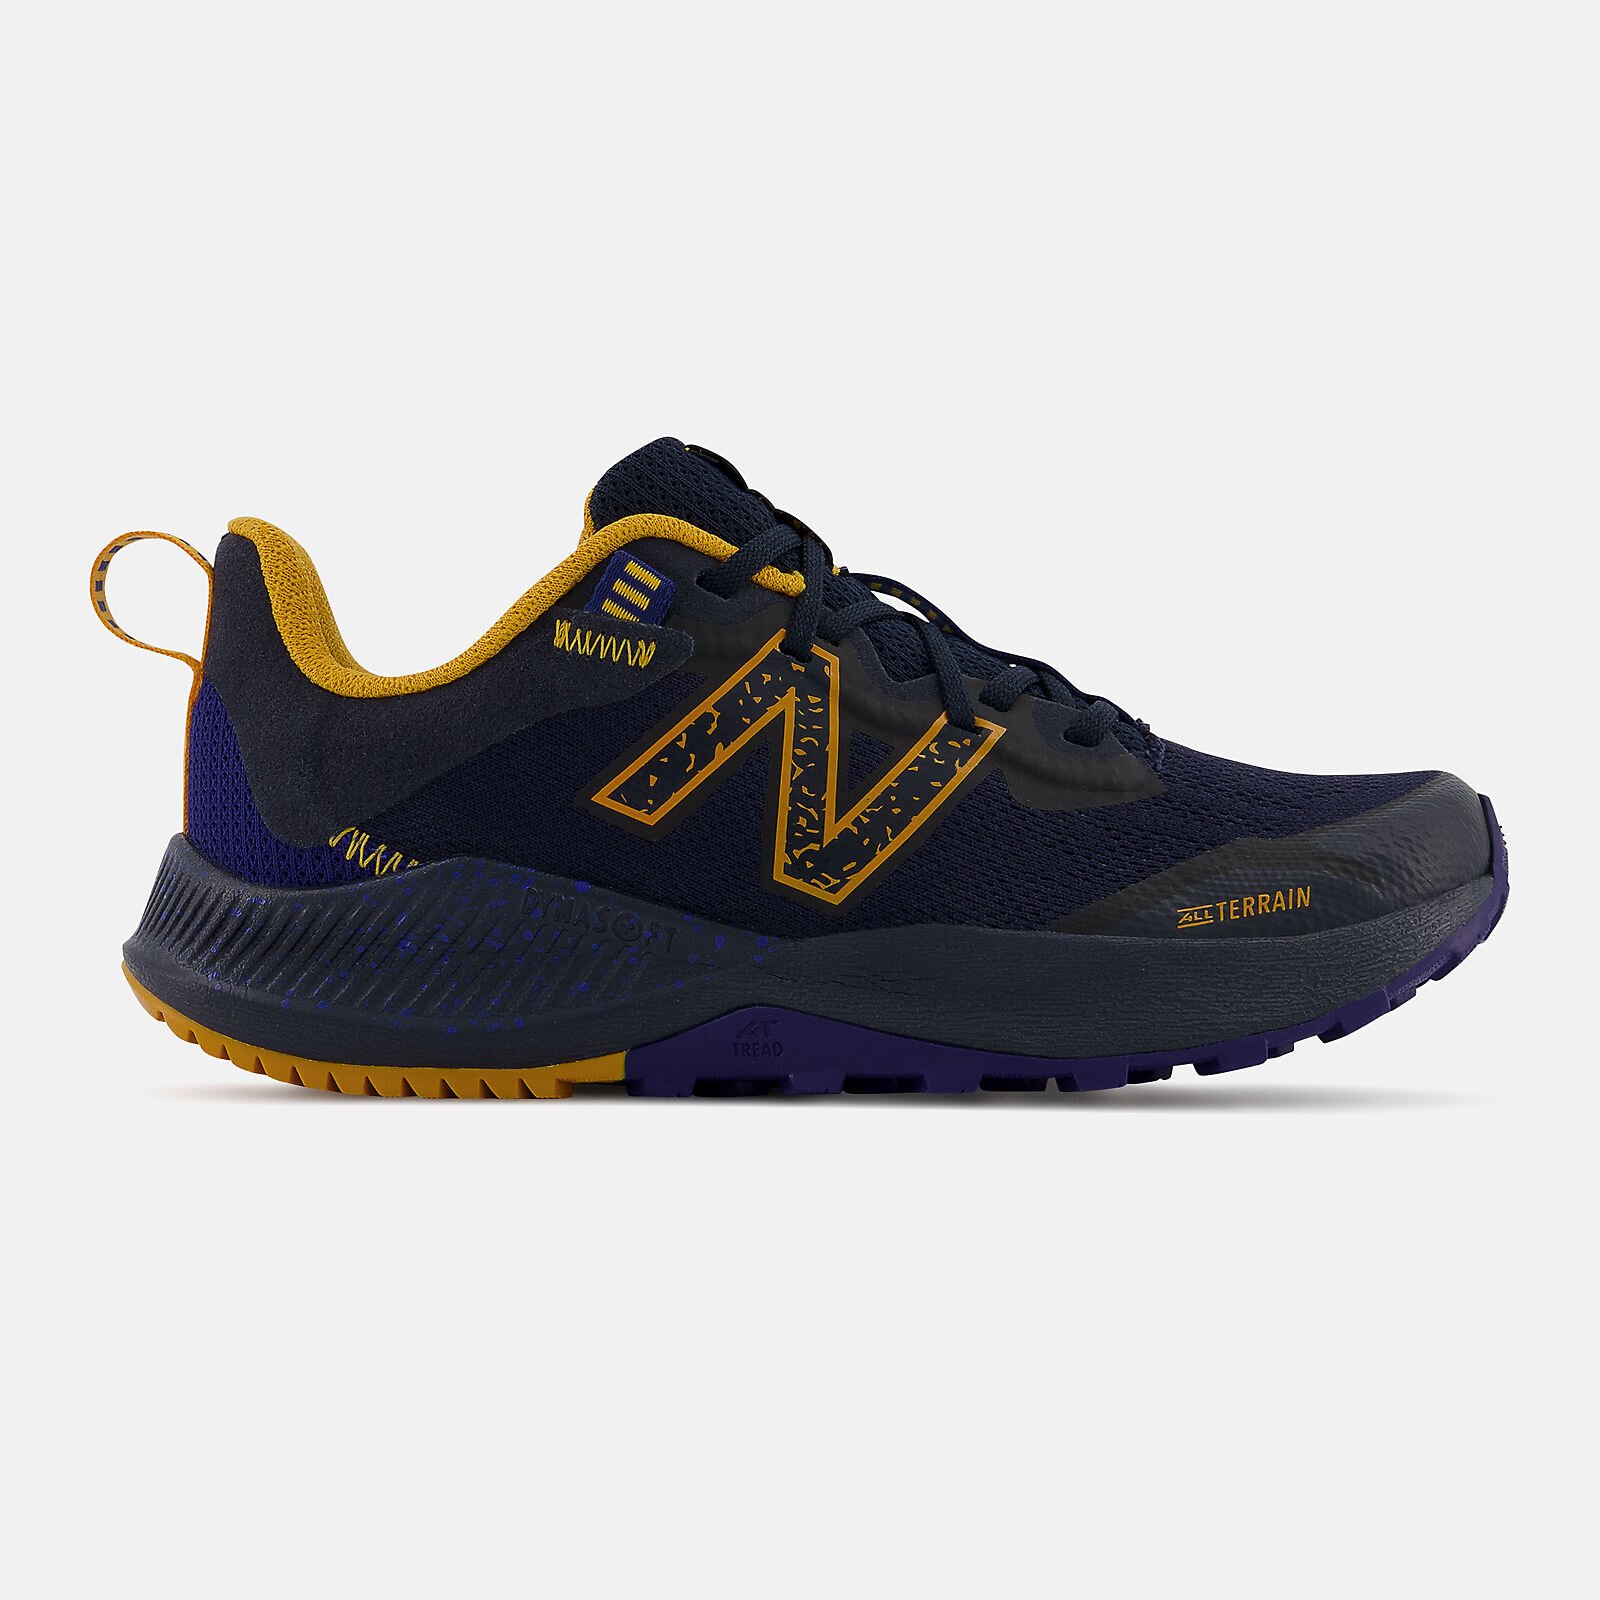 New Balance Nitrel Kids Trail Running Shoes - Buy Online - Ph: 1800-370-766 - AfterPay & ZipPay Available!